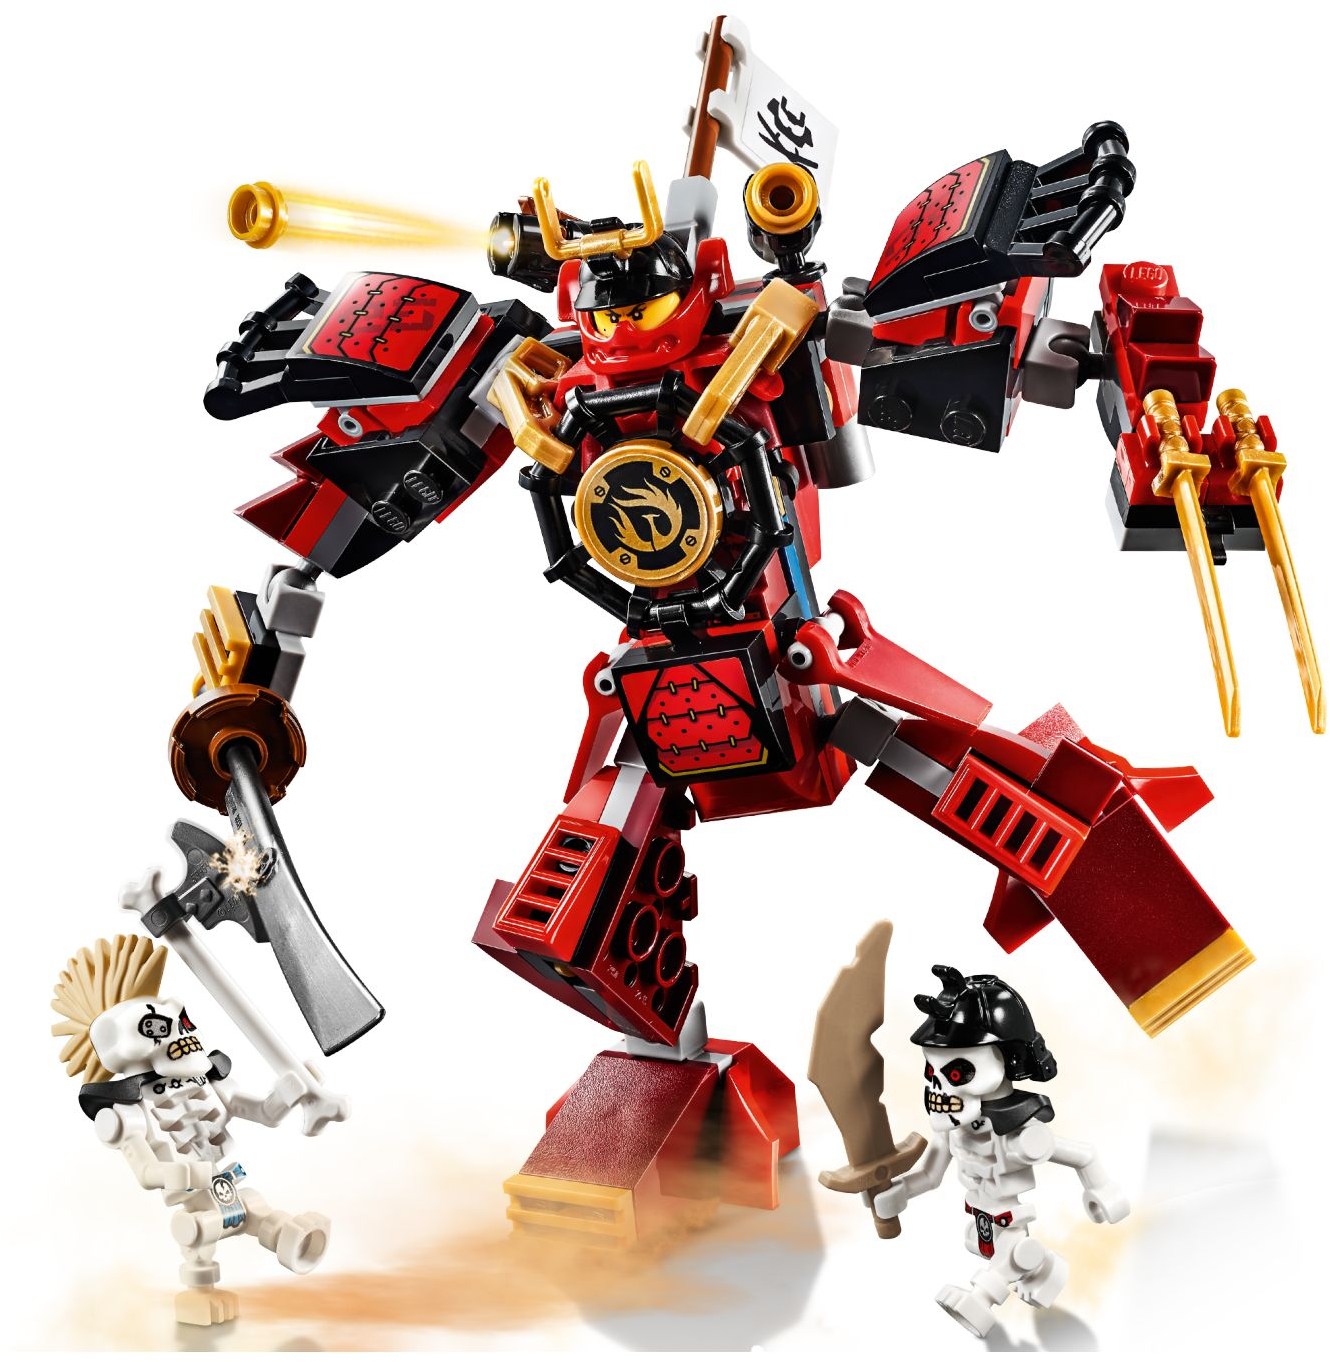 LEGO Ninjago - Samurai Mech - Ninjago - Samurai Mech . shop for